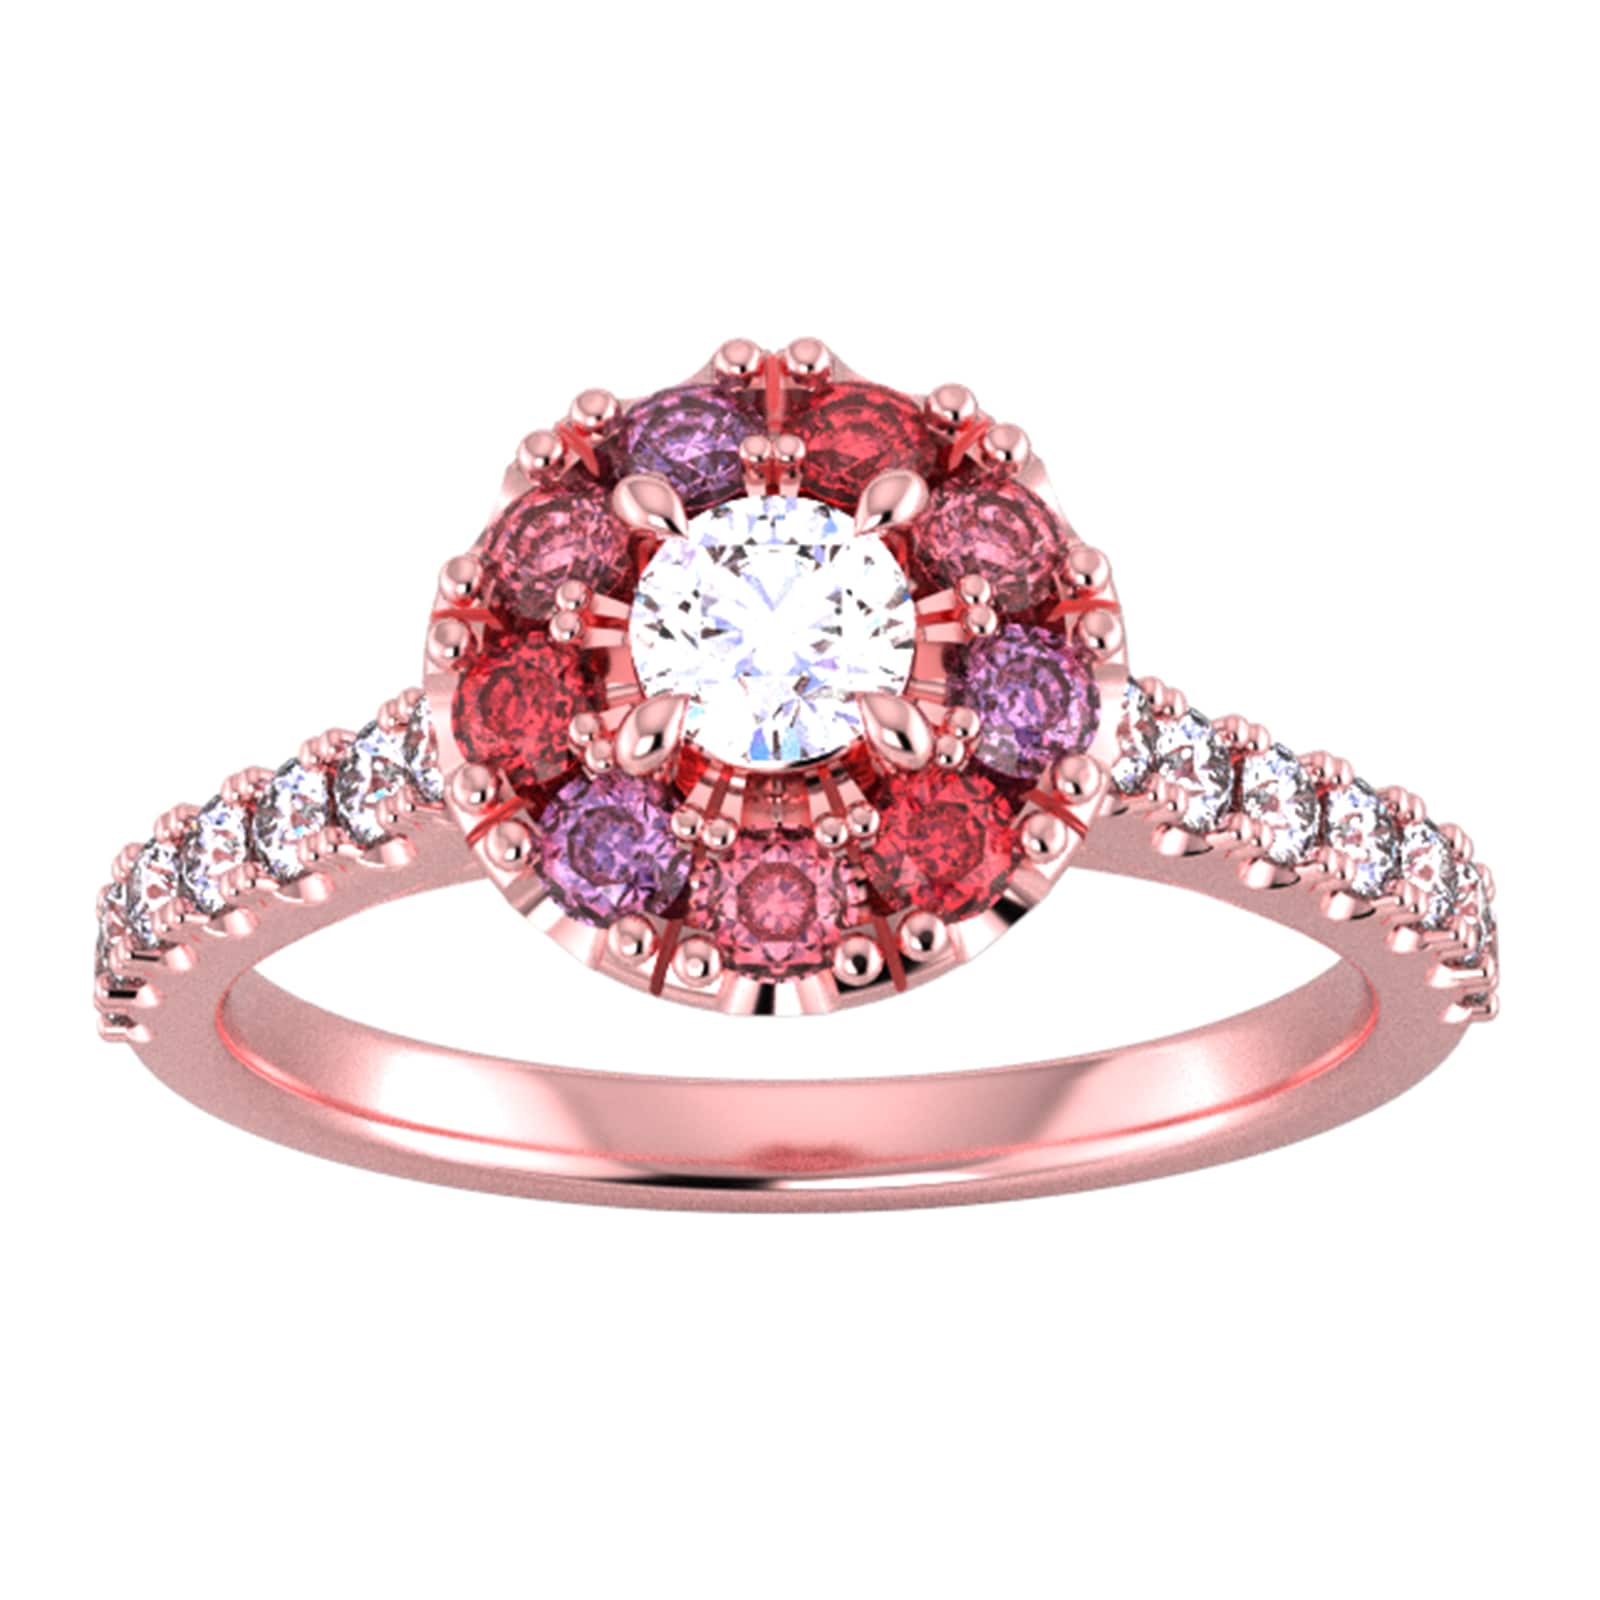 9ct Rose Gold Diamond & Red, Pink, Purple Sapphire Halo Ring - Ring Size I.5